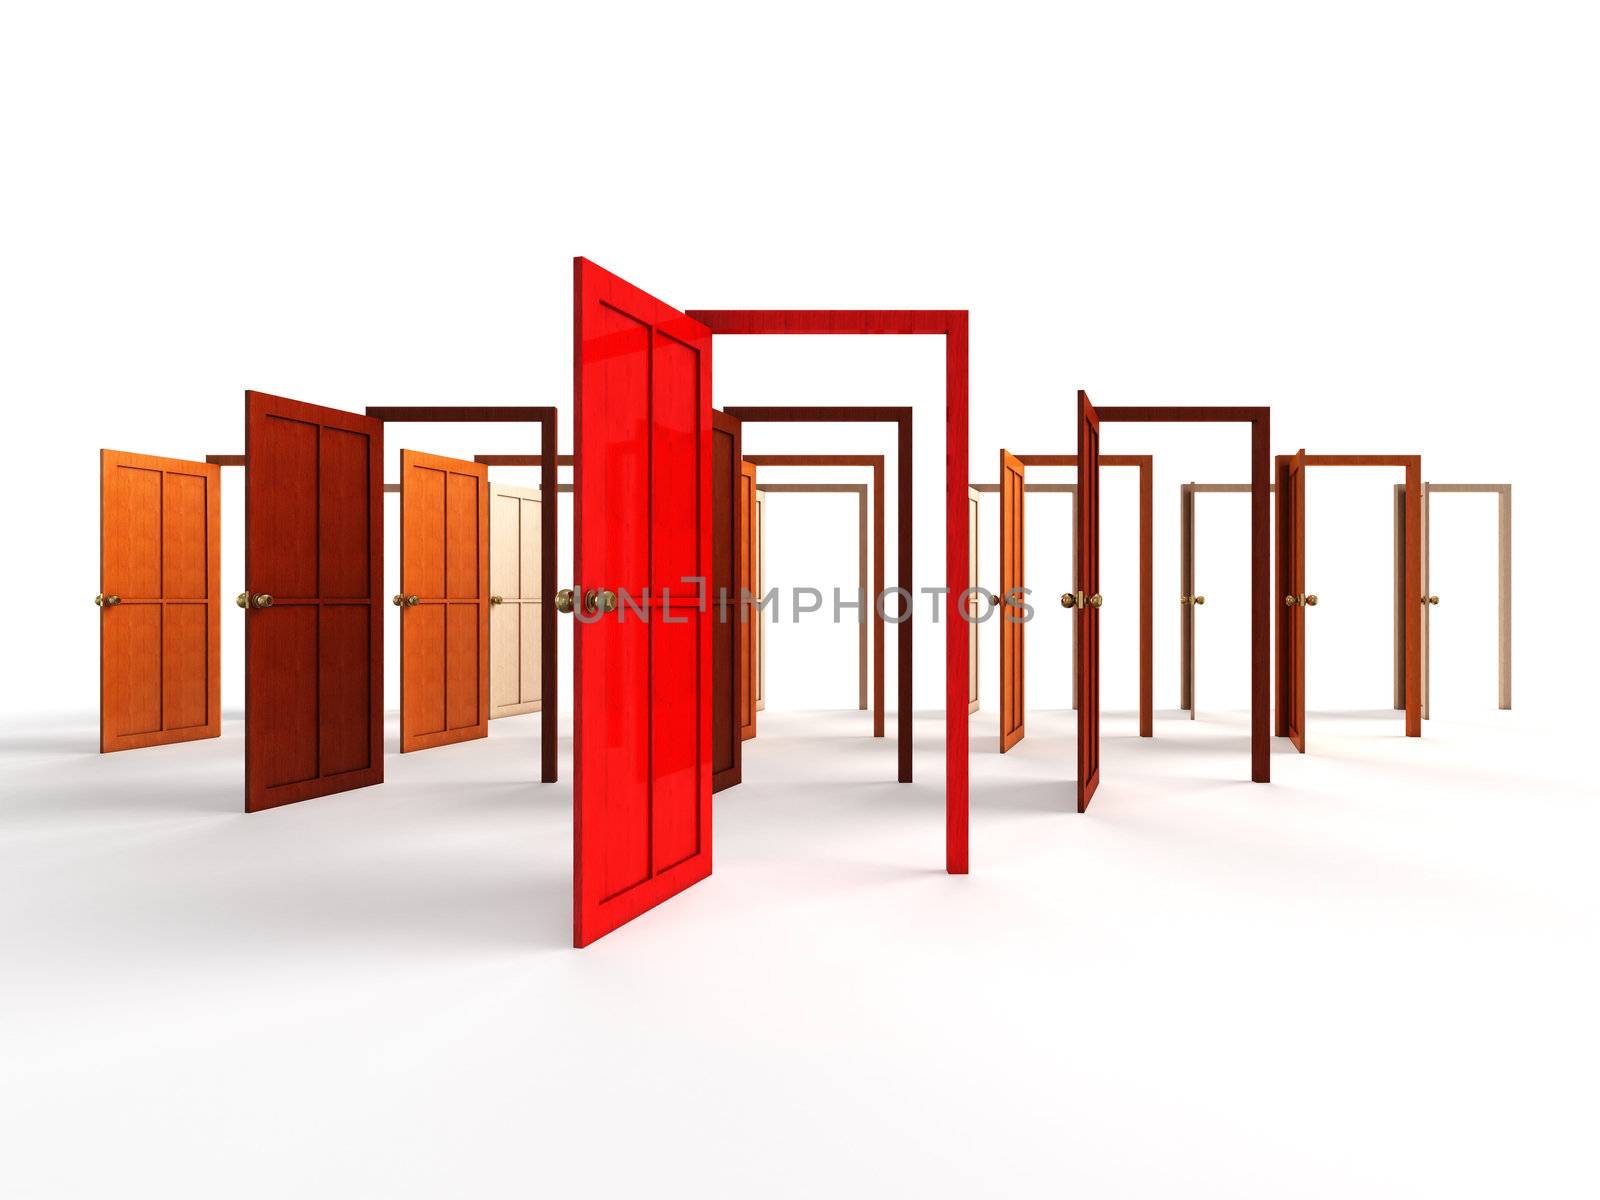 Open doors - welcome, choice, opportunity concept